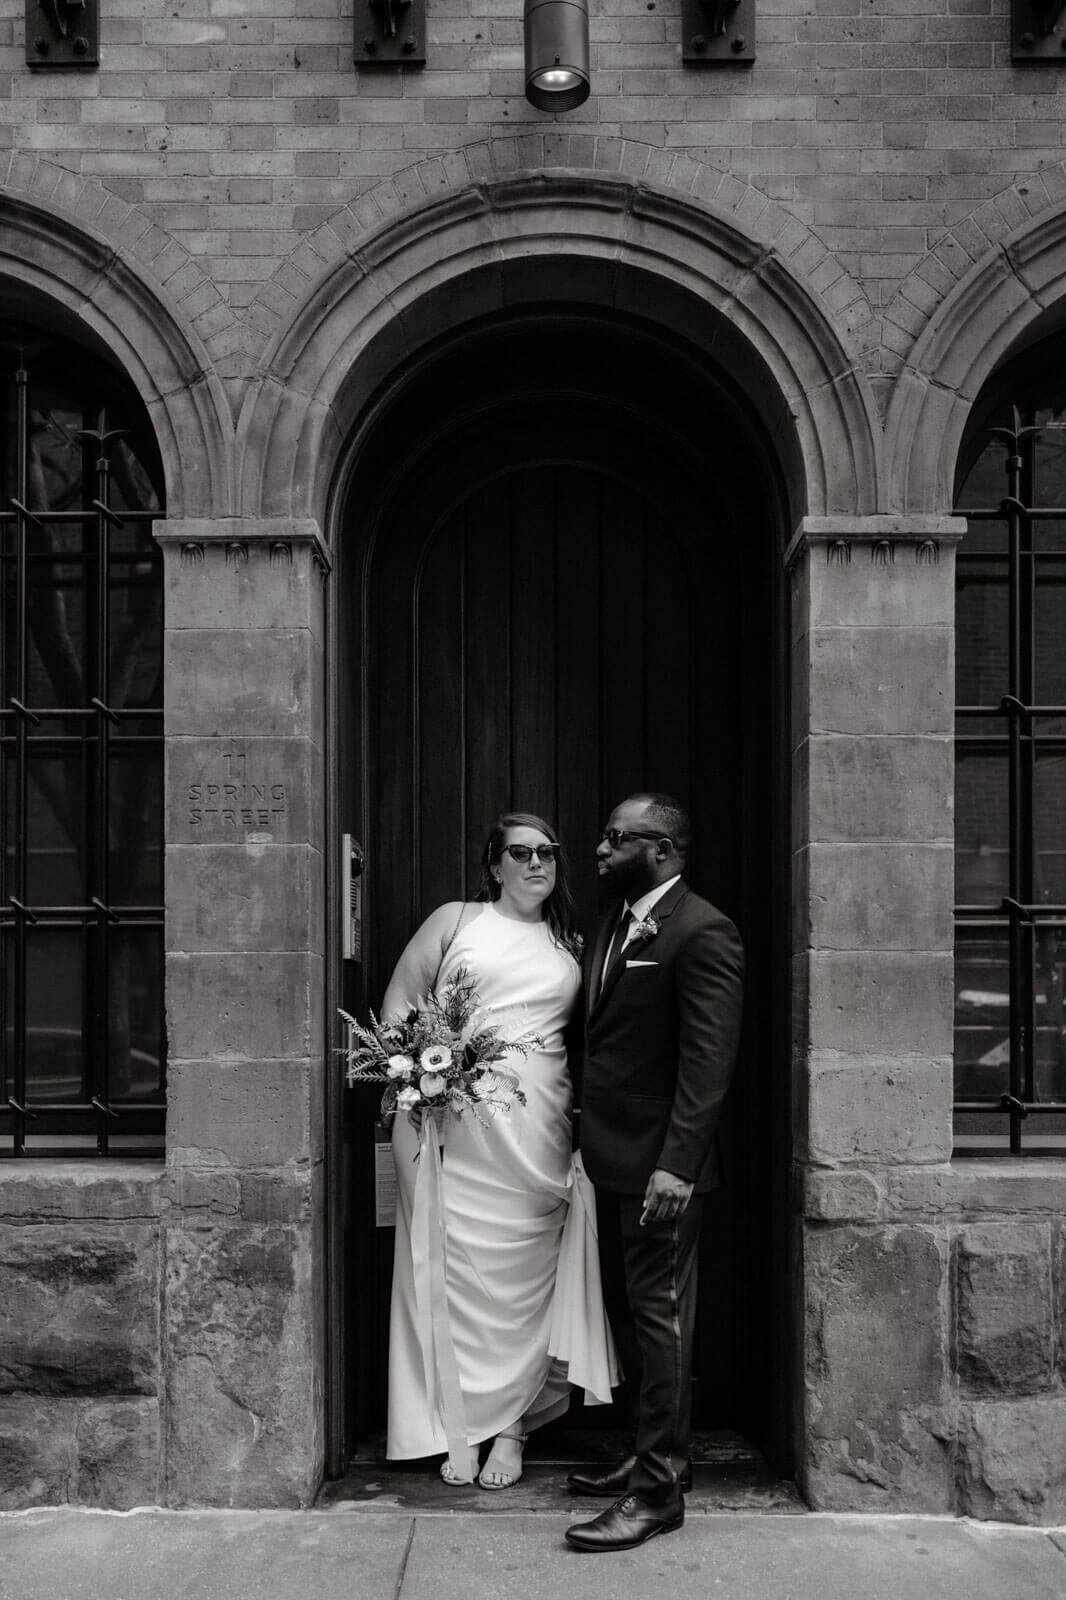 Black and white photo of the bride and the groom in front of 11 Spring Street, New York City.